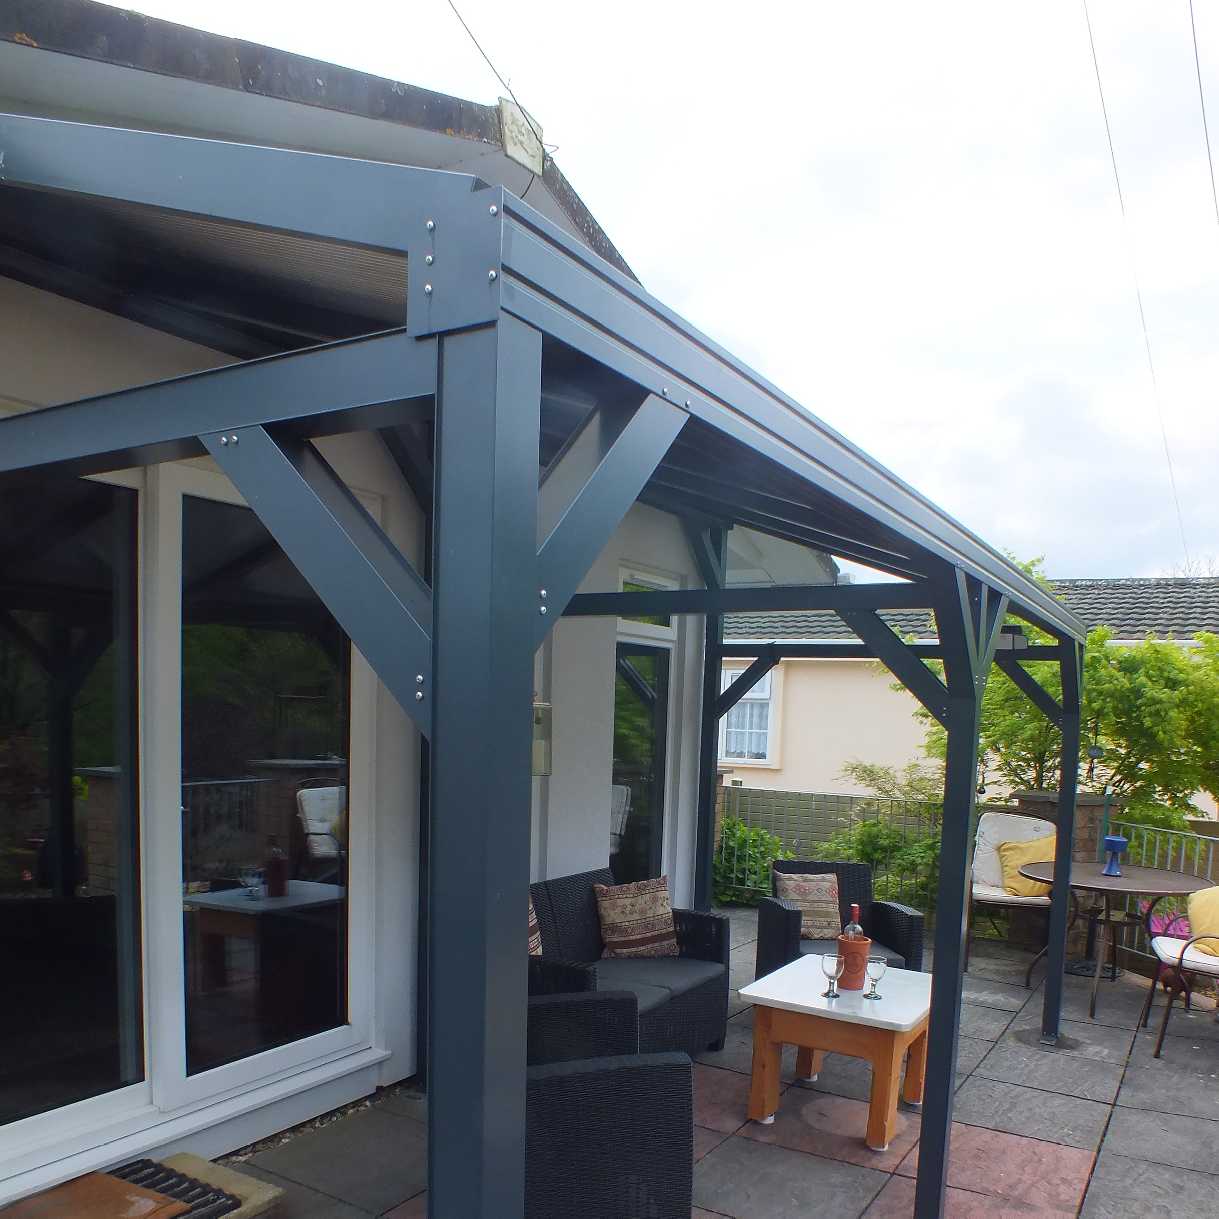 Affordable Omega Smart Free-Standing, Anthracite Grey MonoPitch Roof Canopy with 16mm Polycarbonate Glazing - 4.9m (W) x 4.0m (P), (6) Supporting Posts